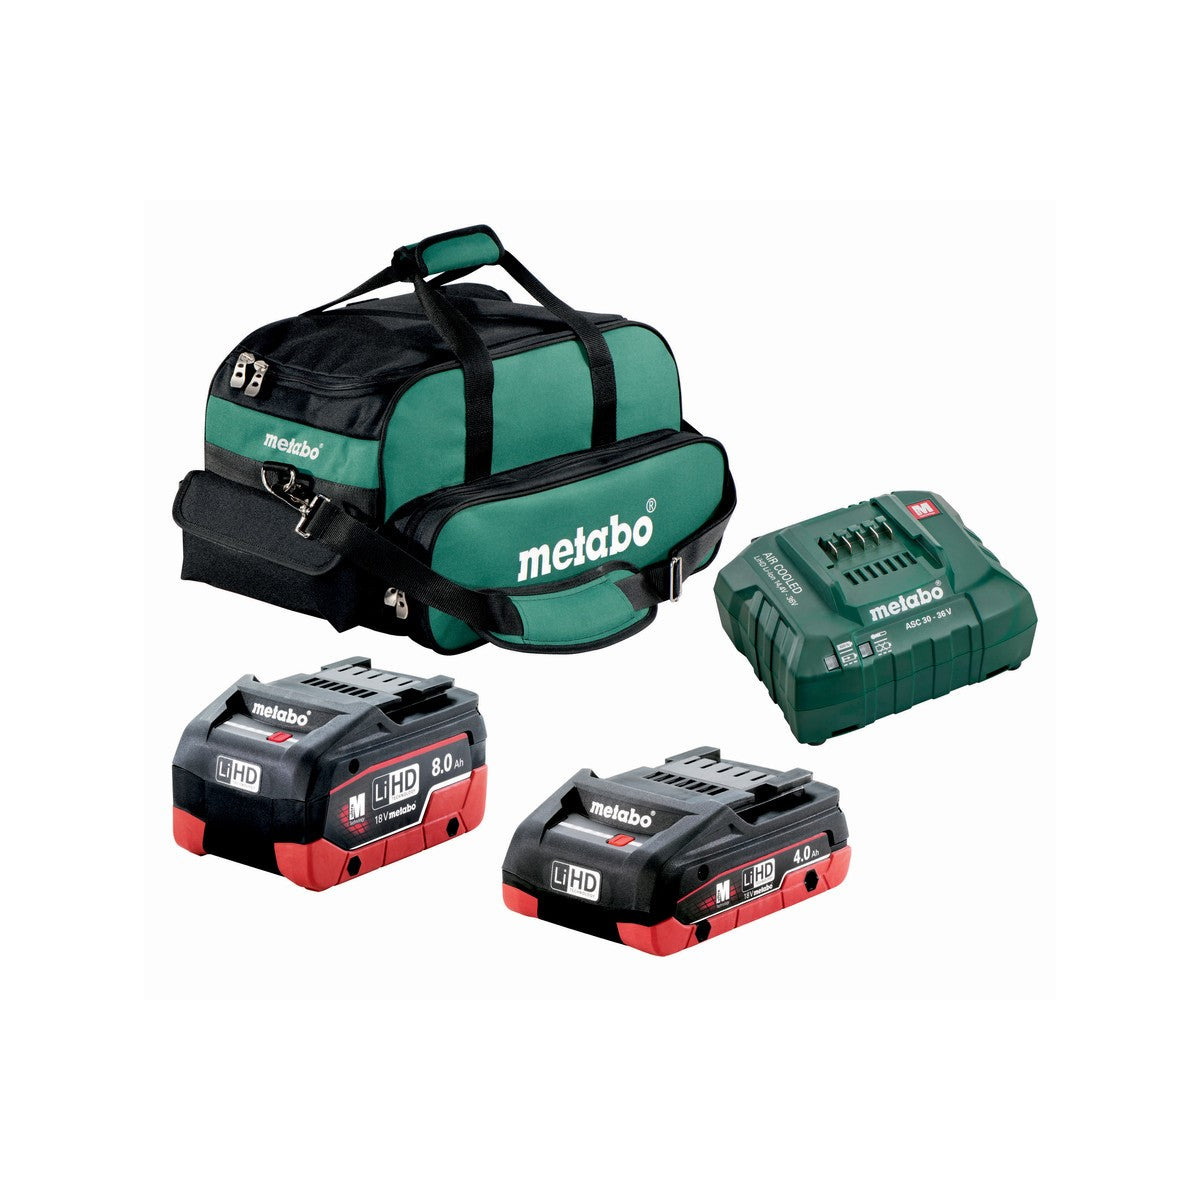 Metabo (US625369011) 18V Battery Starter Kit w 40AH LiHD Compact and 80AH LiHD Pro Batteries